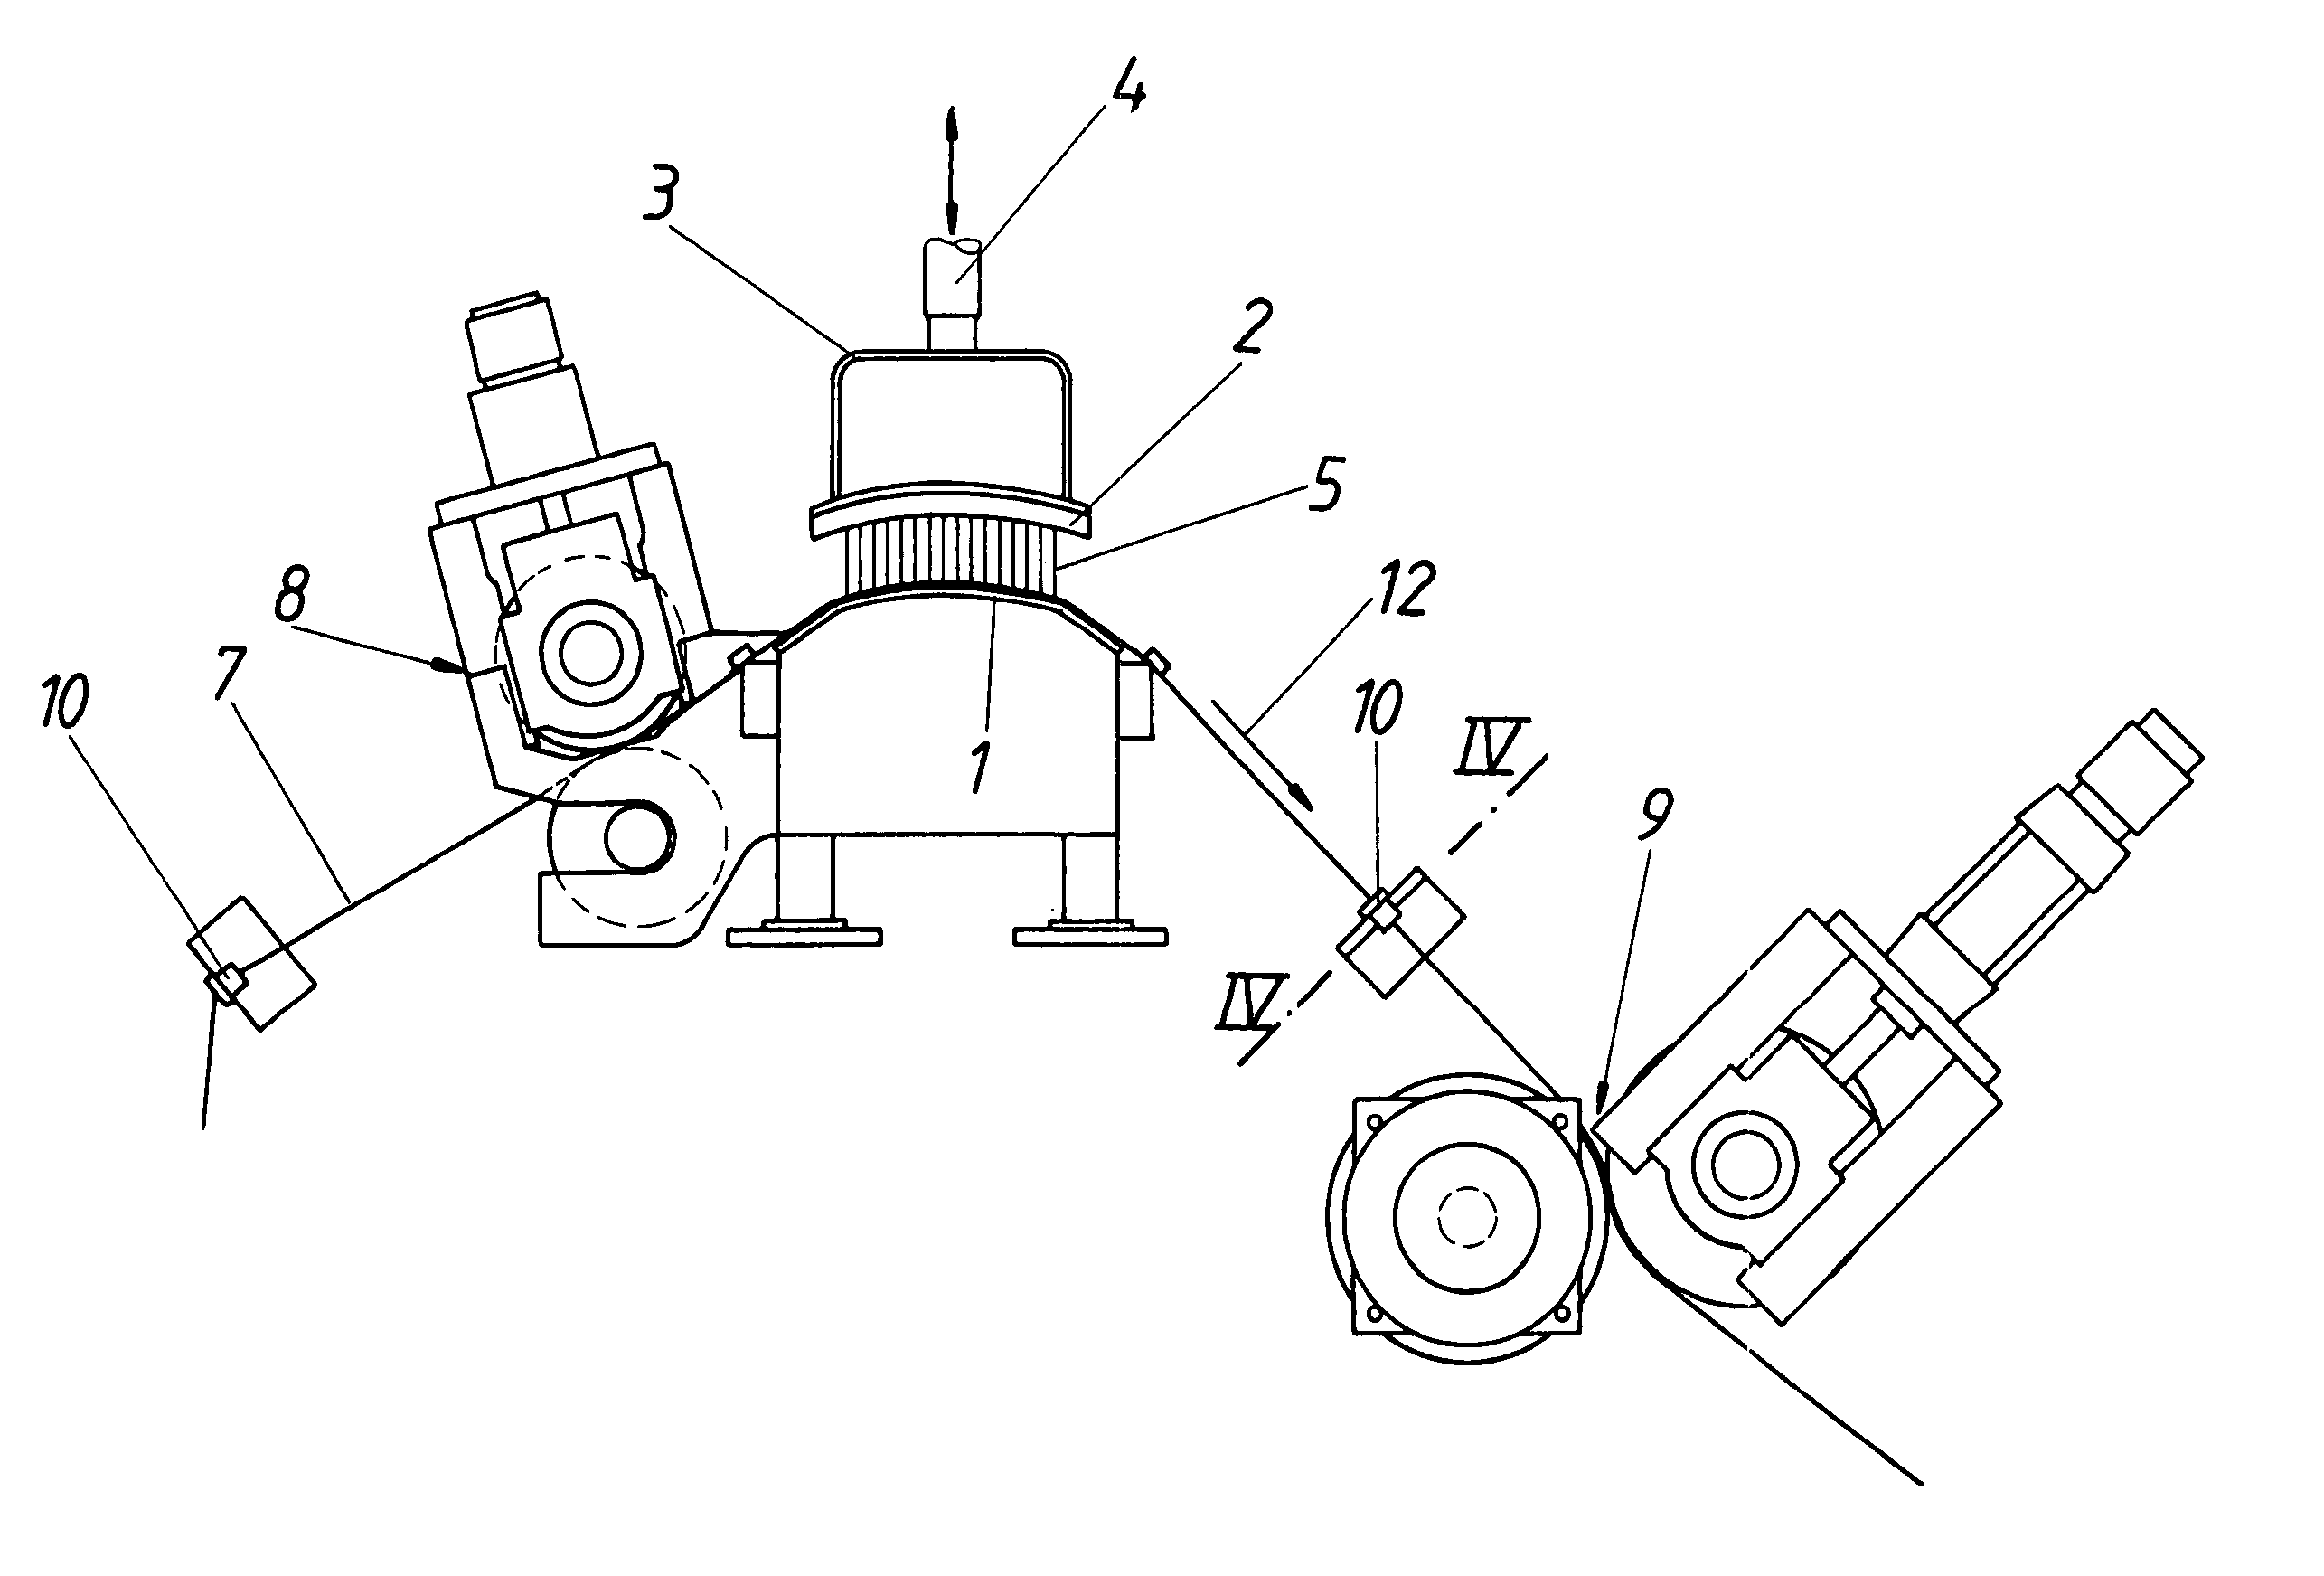 Method and apparatus for producing mop trimmings